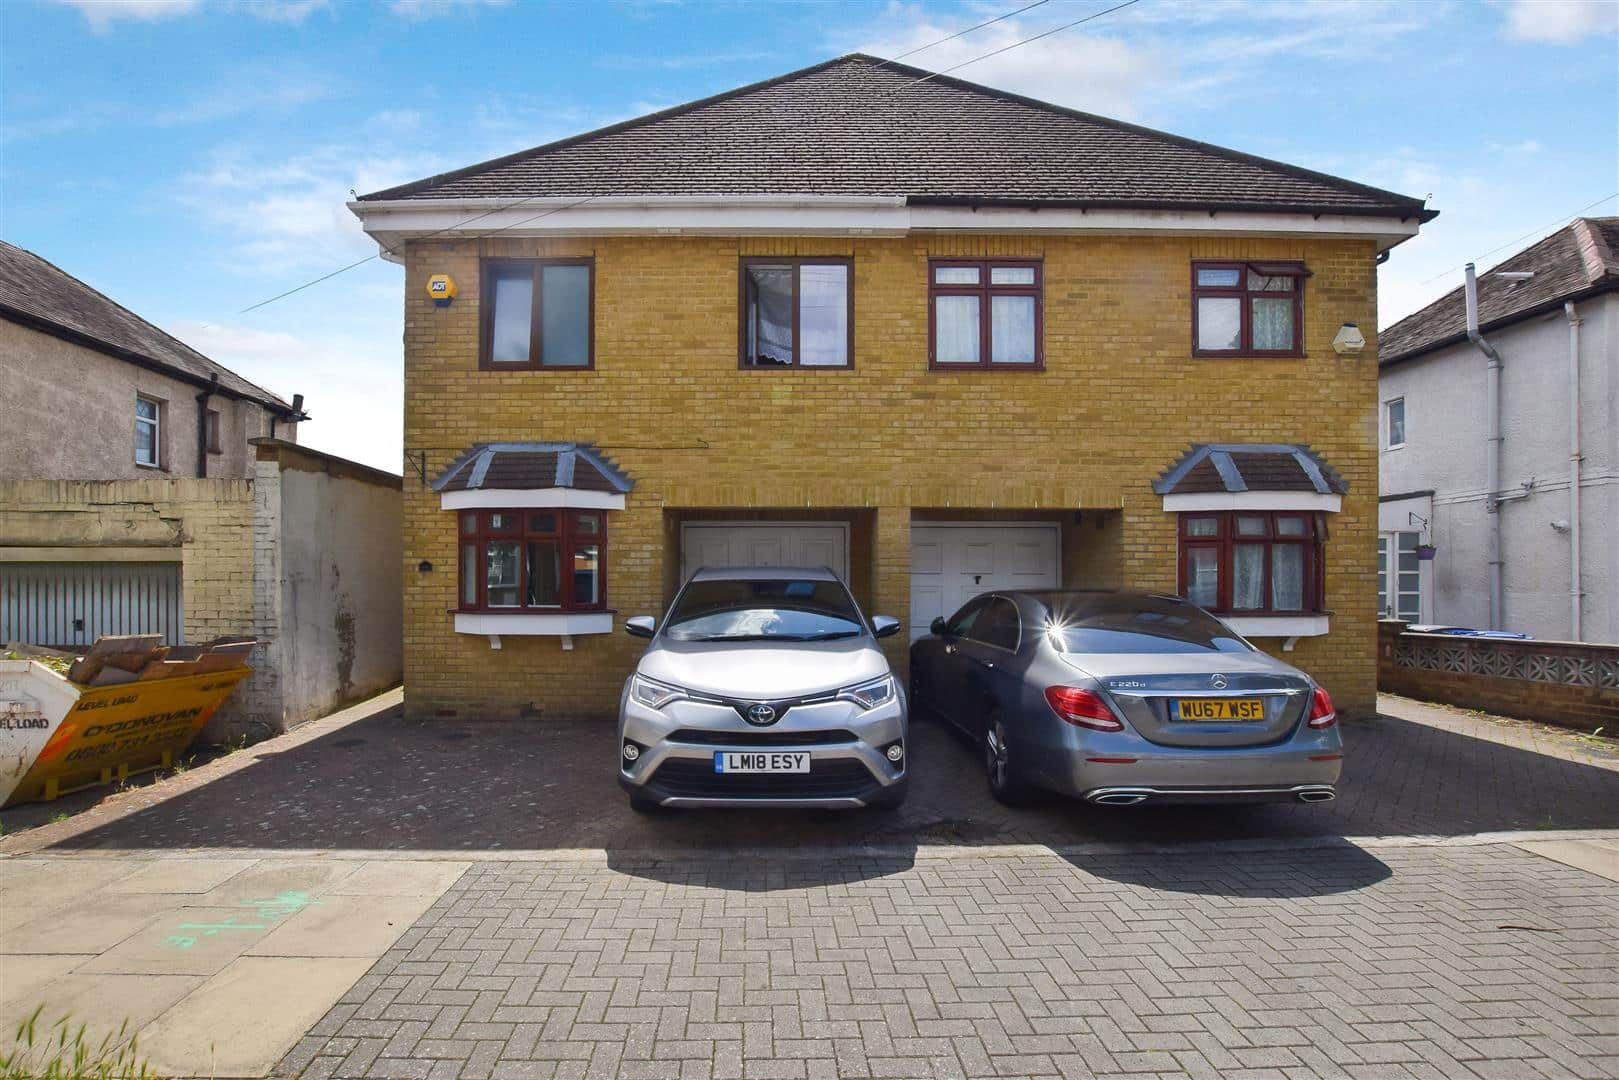 Beaumont Avenue, Wembley, Middlesex, HA0 3BY